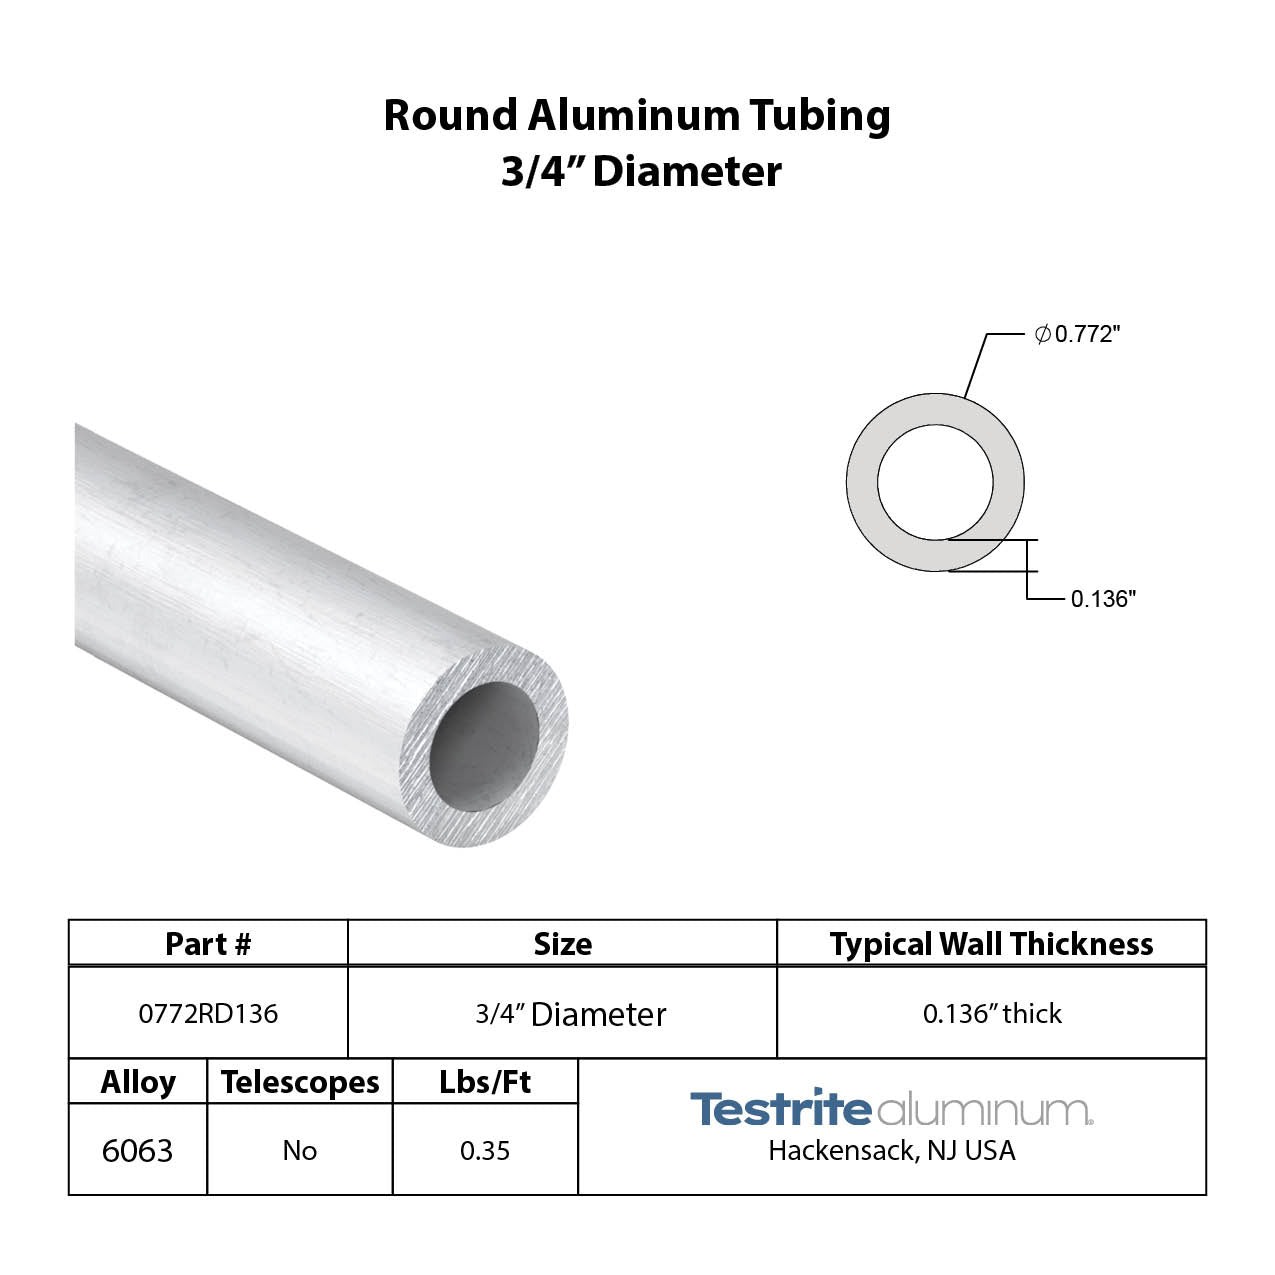 Spec sheet for approximately 0.75" x .125" Aluminum Round Tube, actual size 0.772" Diameter x .136" Wall, nearly a 3/4" x 1/8" Wall round aluminum tube, spec card includes lbs per ft